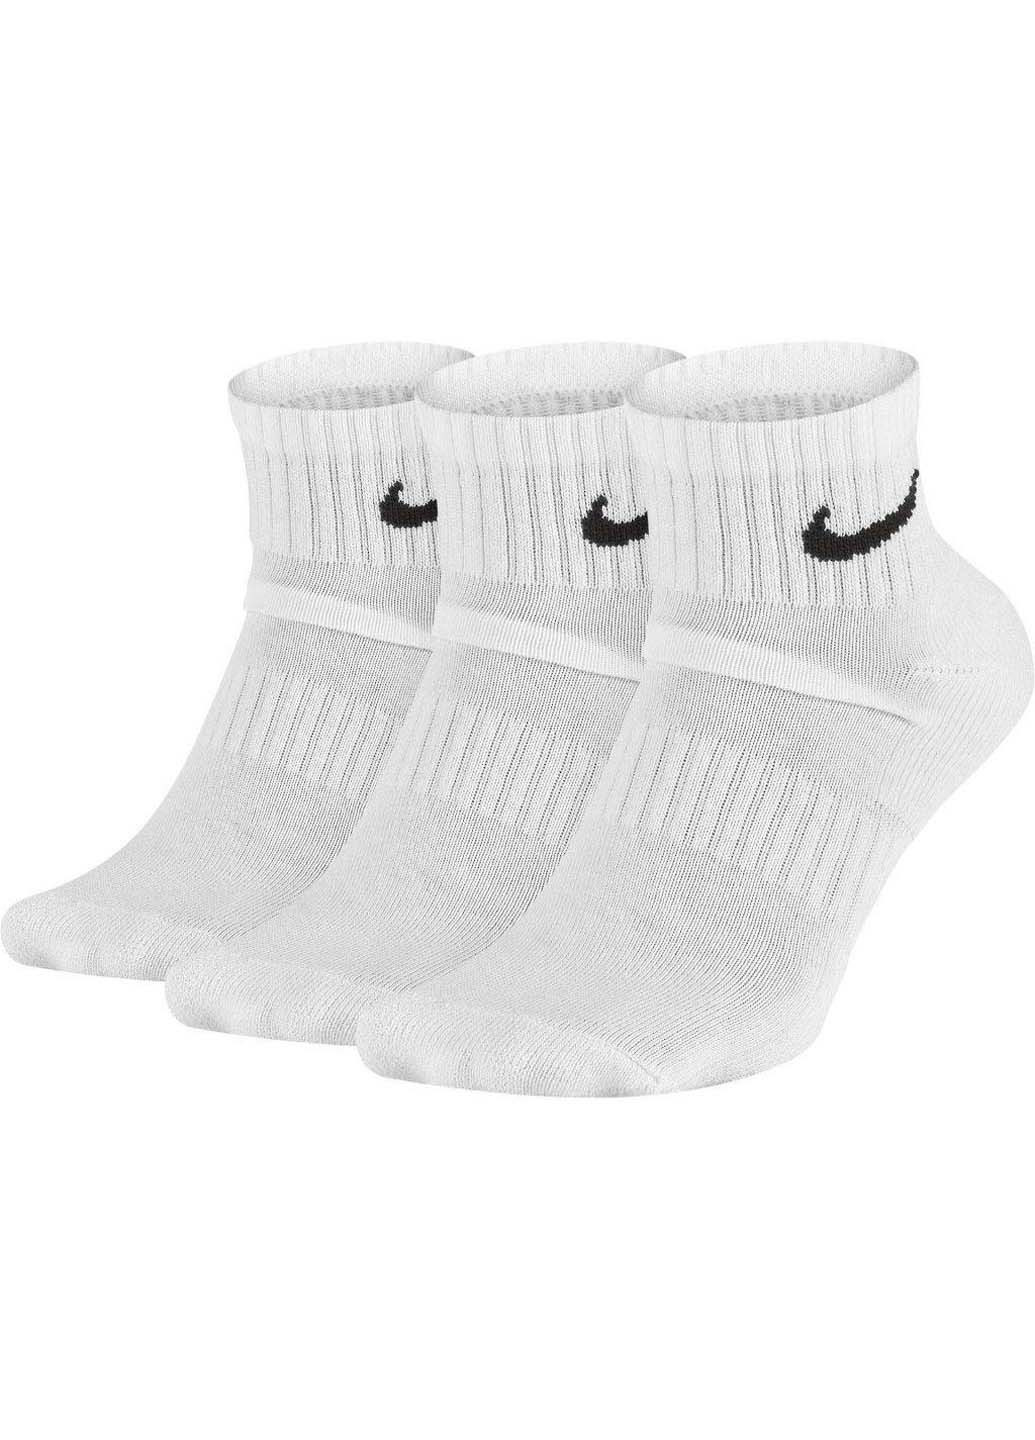 Носки Nike everyday cushion ankle 3-pack (255920513)